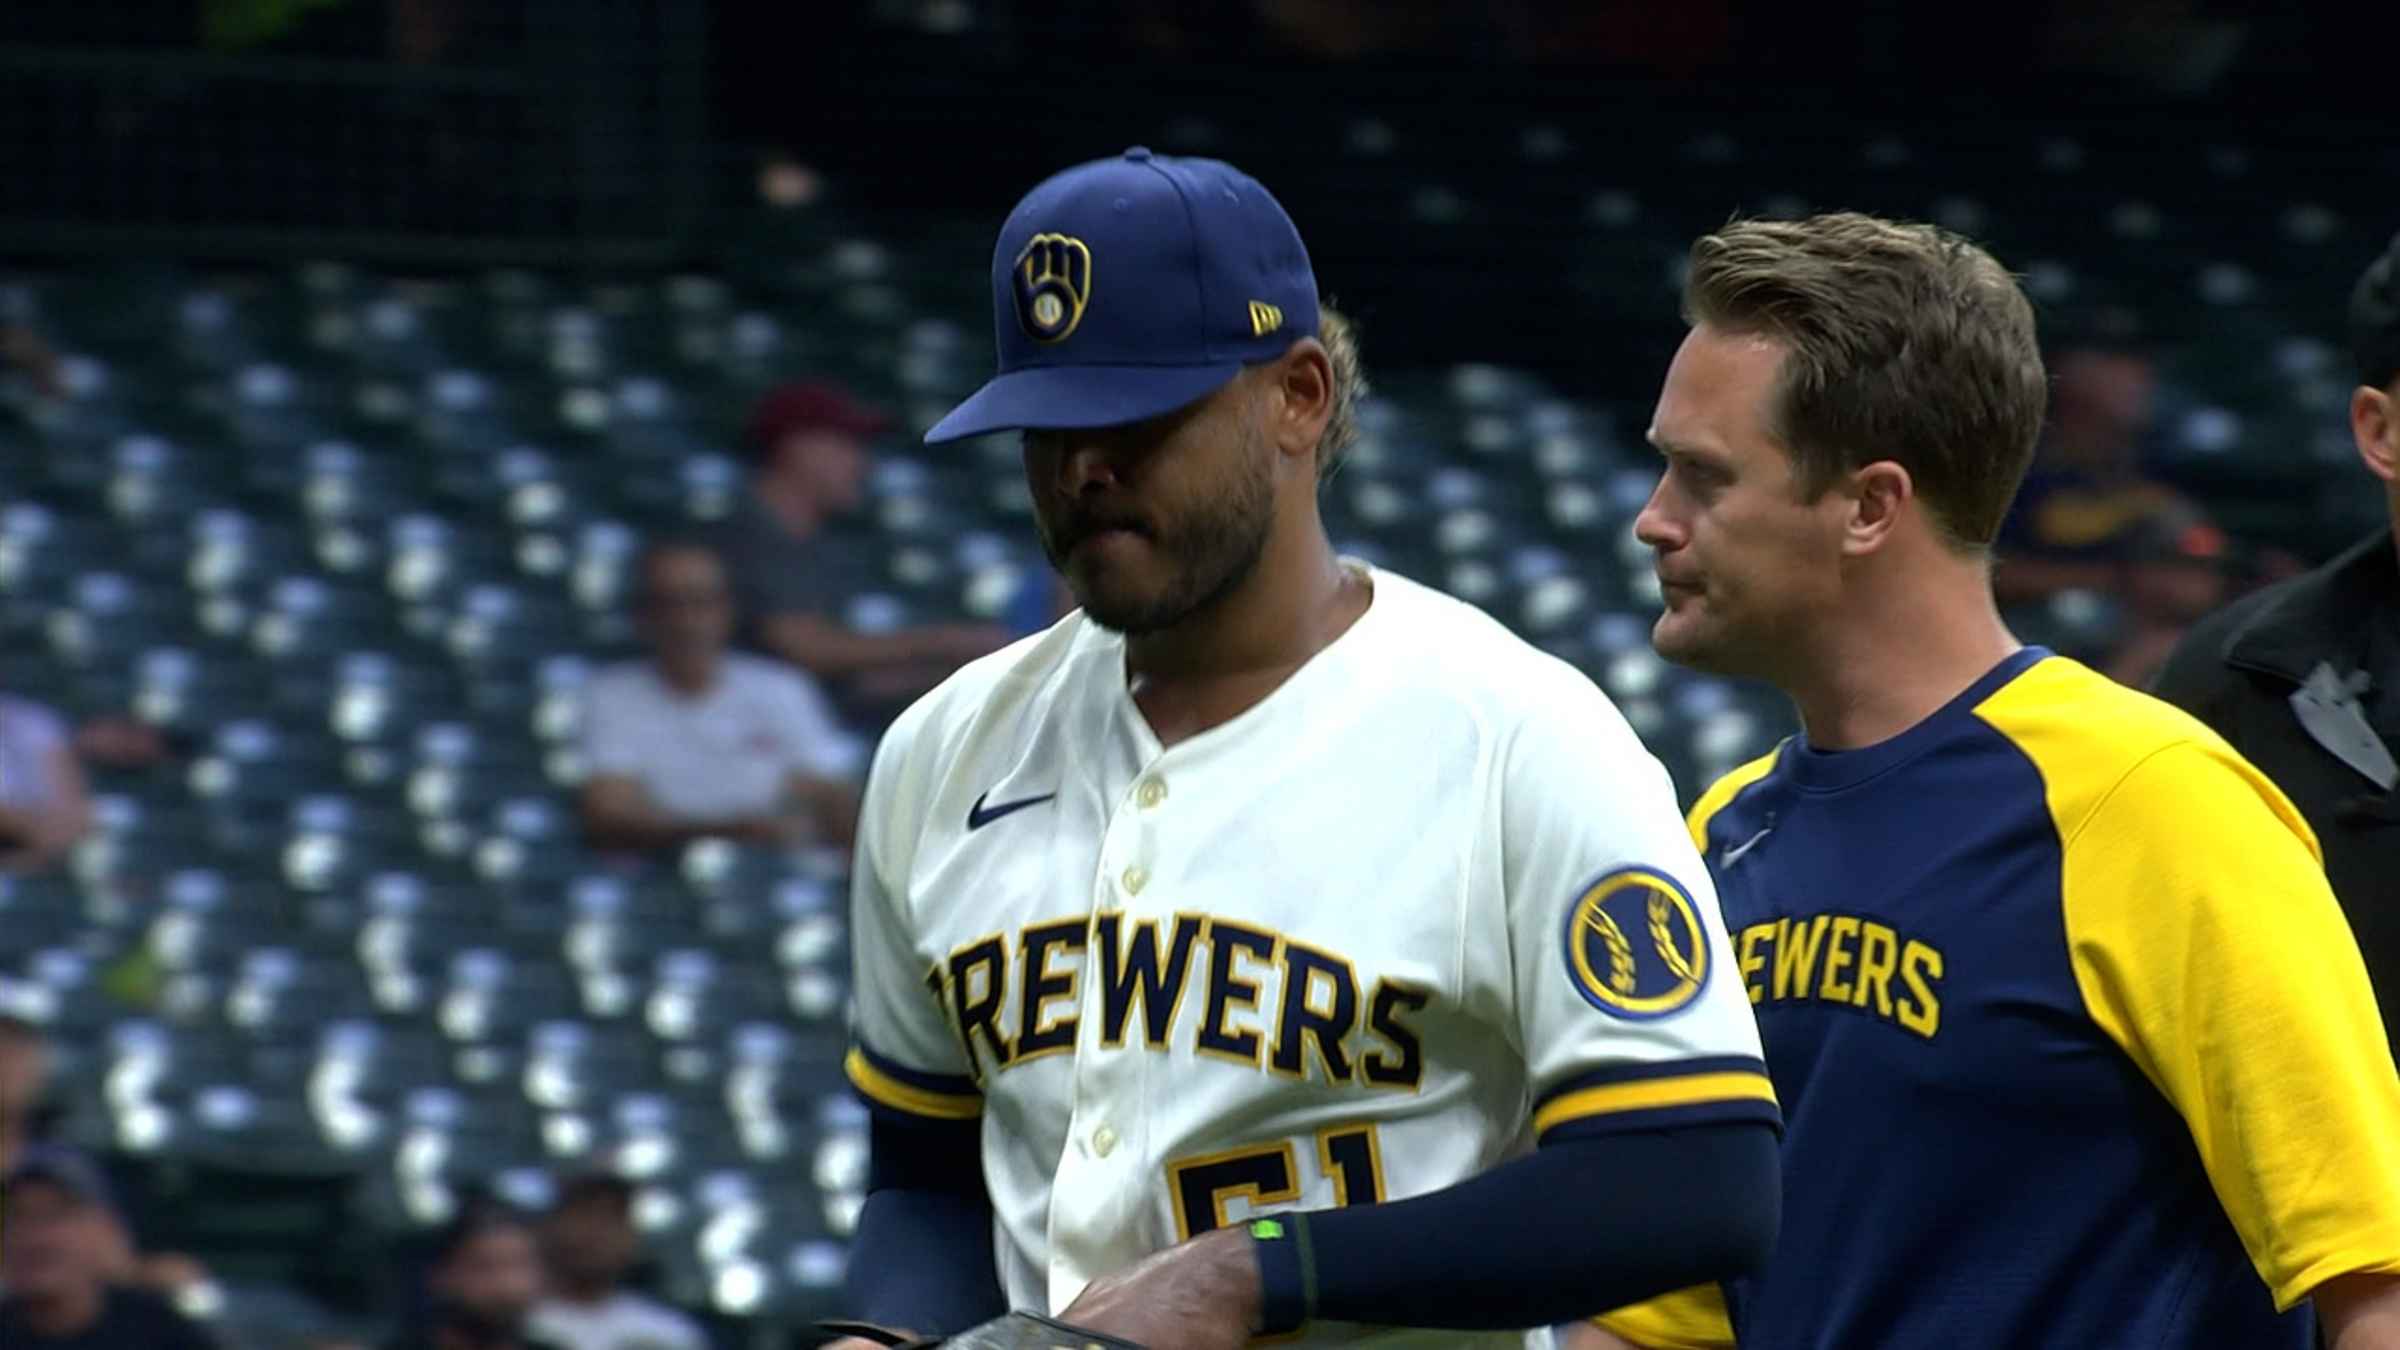 Brewers news: Freddy Peralta dealt brutal injury blow after exiting vs. Nats